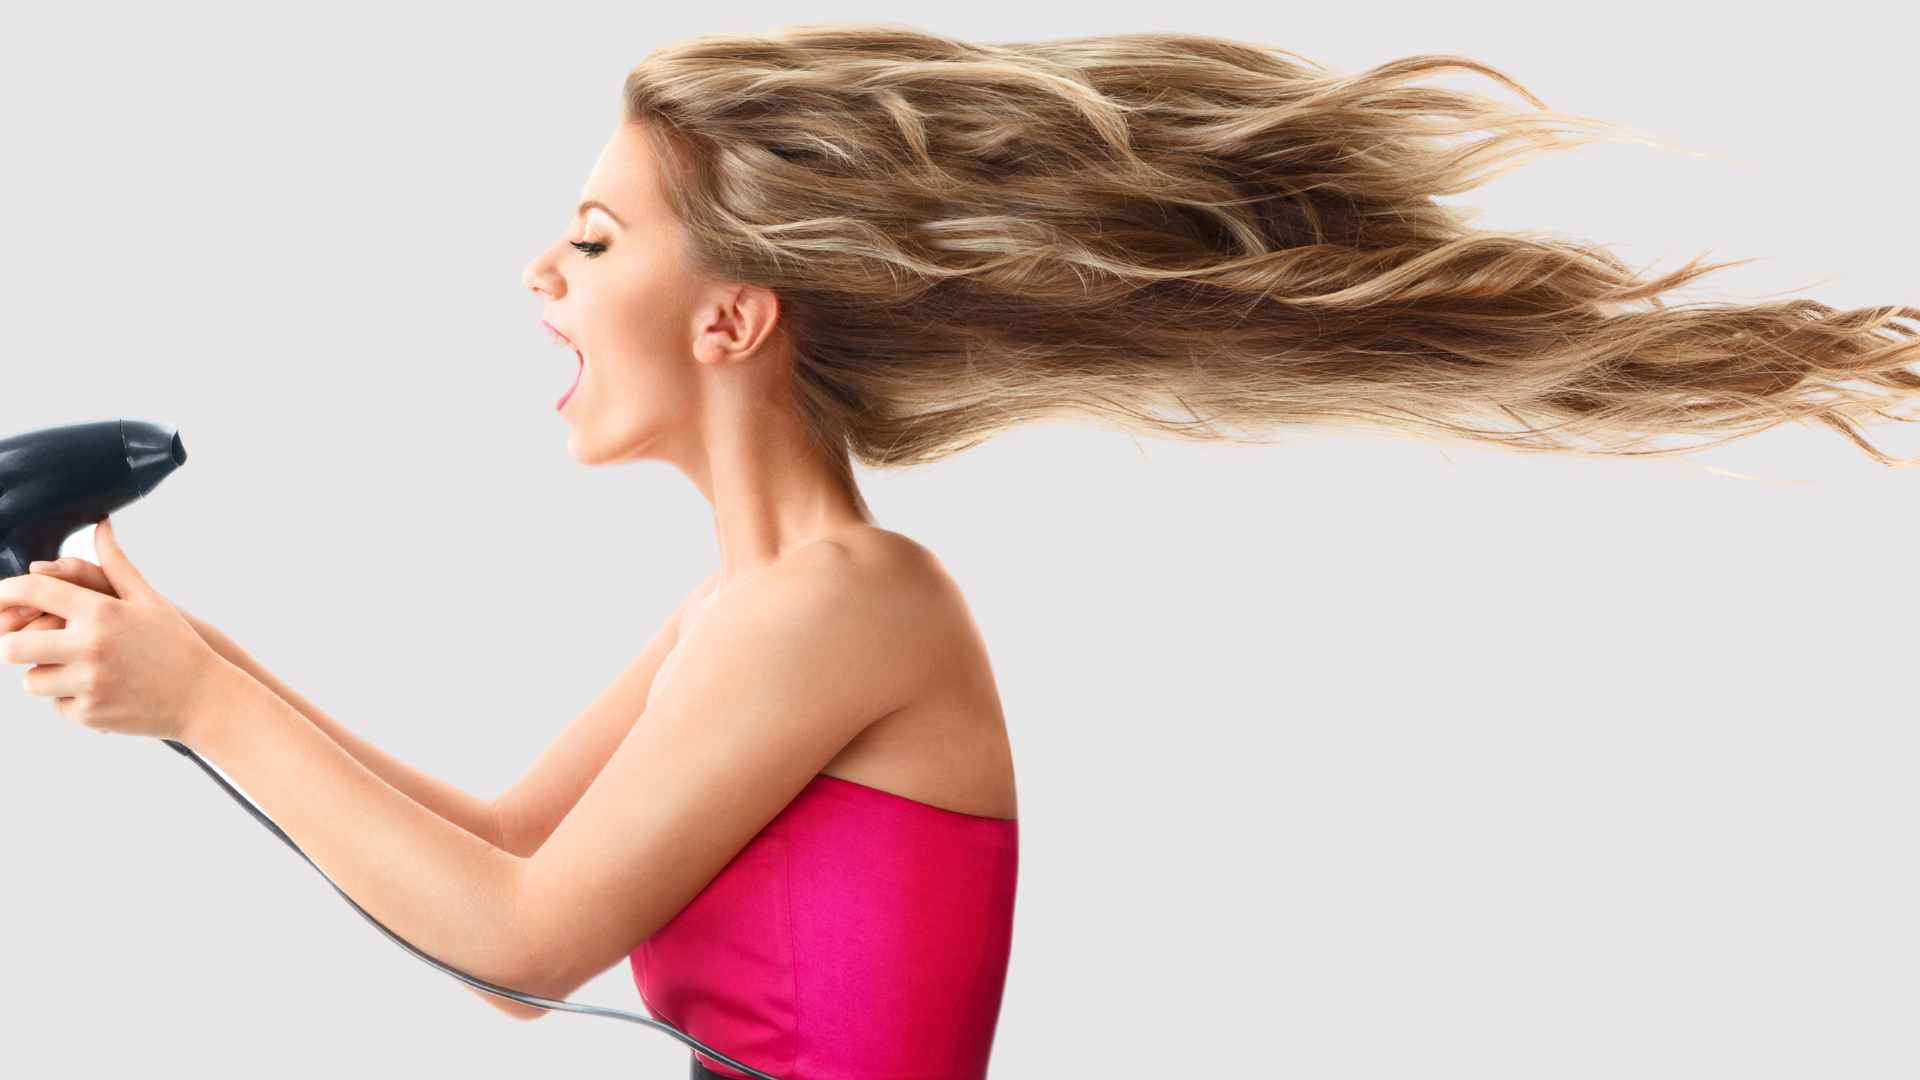 Female with long blonde hair holding a hair dryer to lift her hair